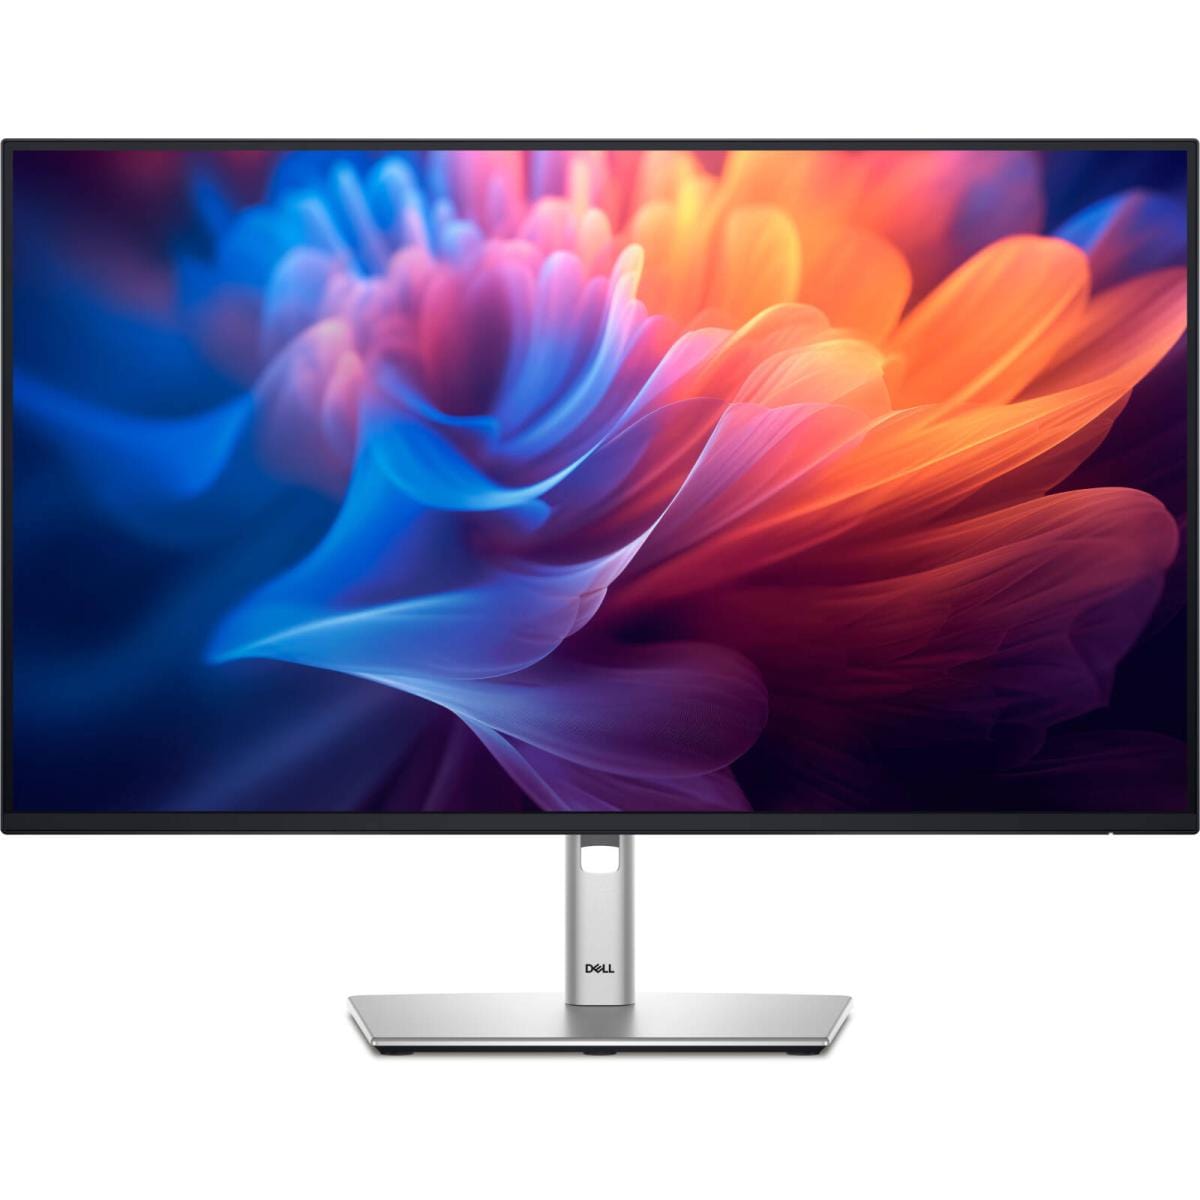 DELL Computer Monitors Dell P2725H Flat Professional Monitor 27" FHD IPS @100HZ, 99% sRGB, Ultrathin Bezel Display, Adjustable Stand, DP Port, HDMI, VGA, Type-C (Data Only)